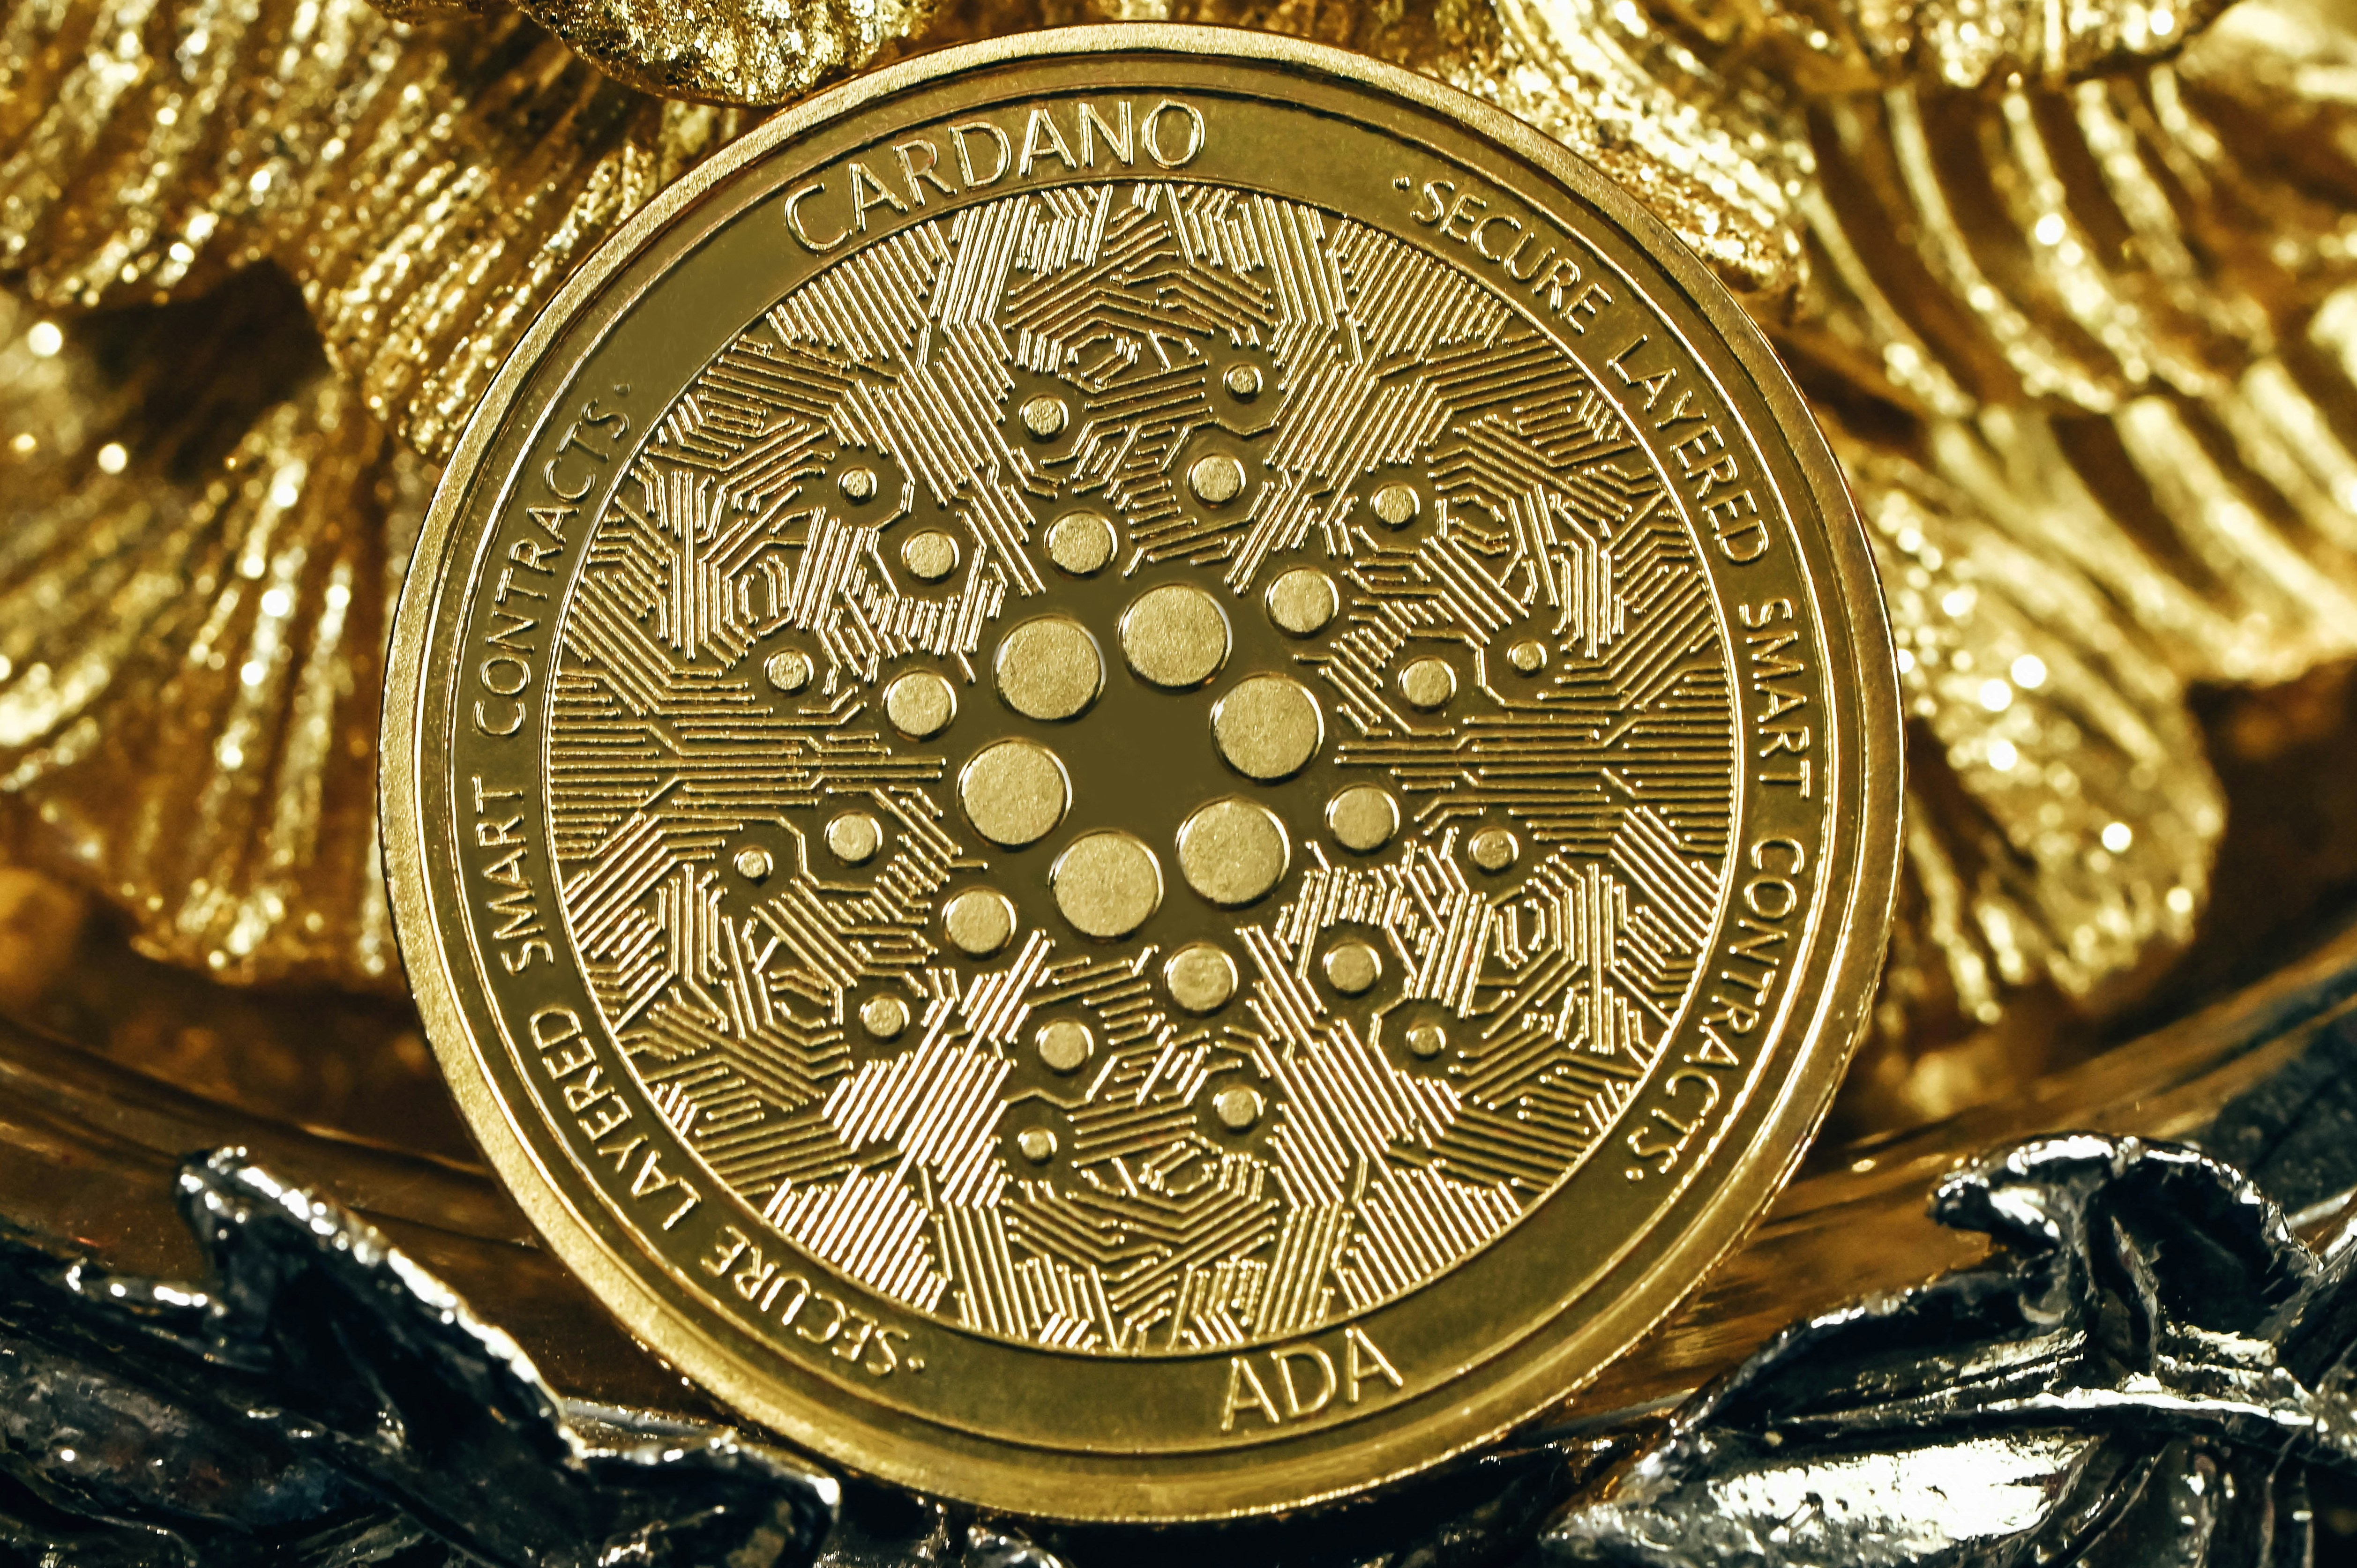 A Cardano coin standing in front of a ceramic pine tree